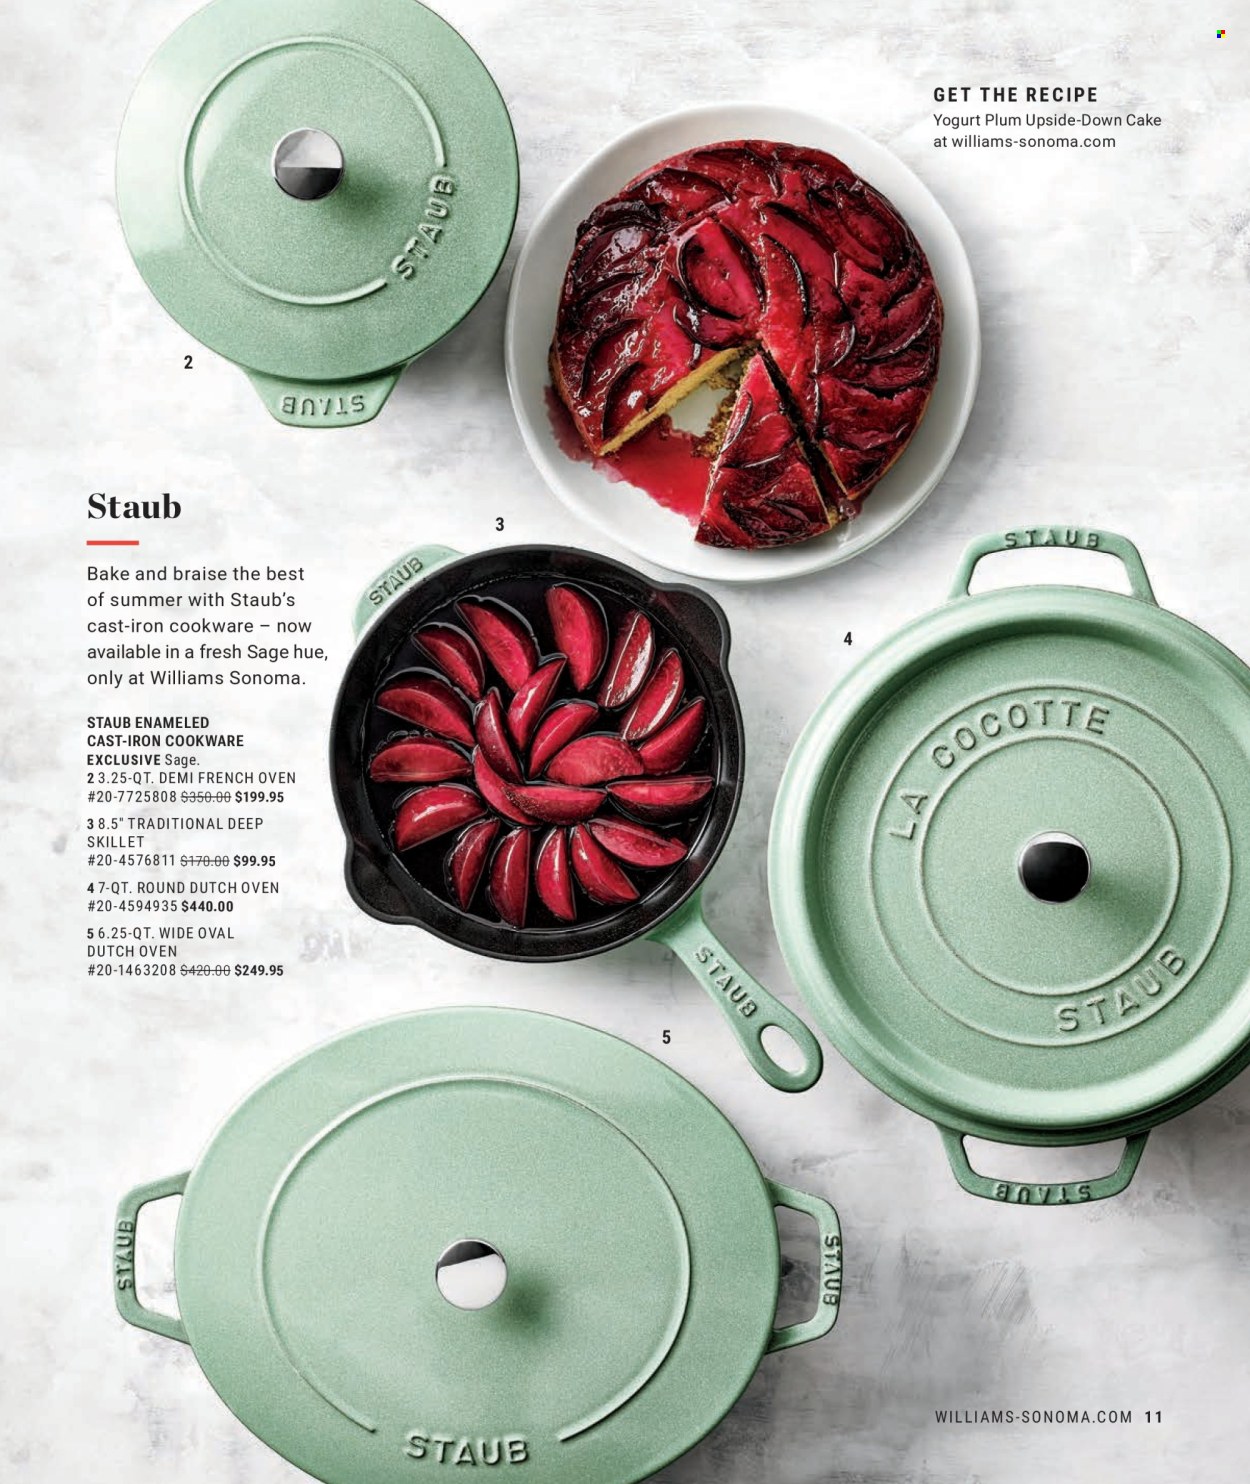 thumbnail - Williams-Sonoma Flyer - Sales products - cake, cookware set, cast iron dutch oven. Page 11.